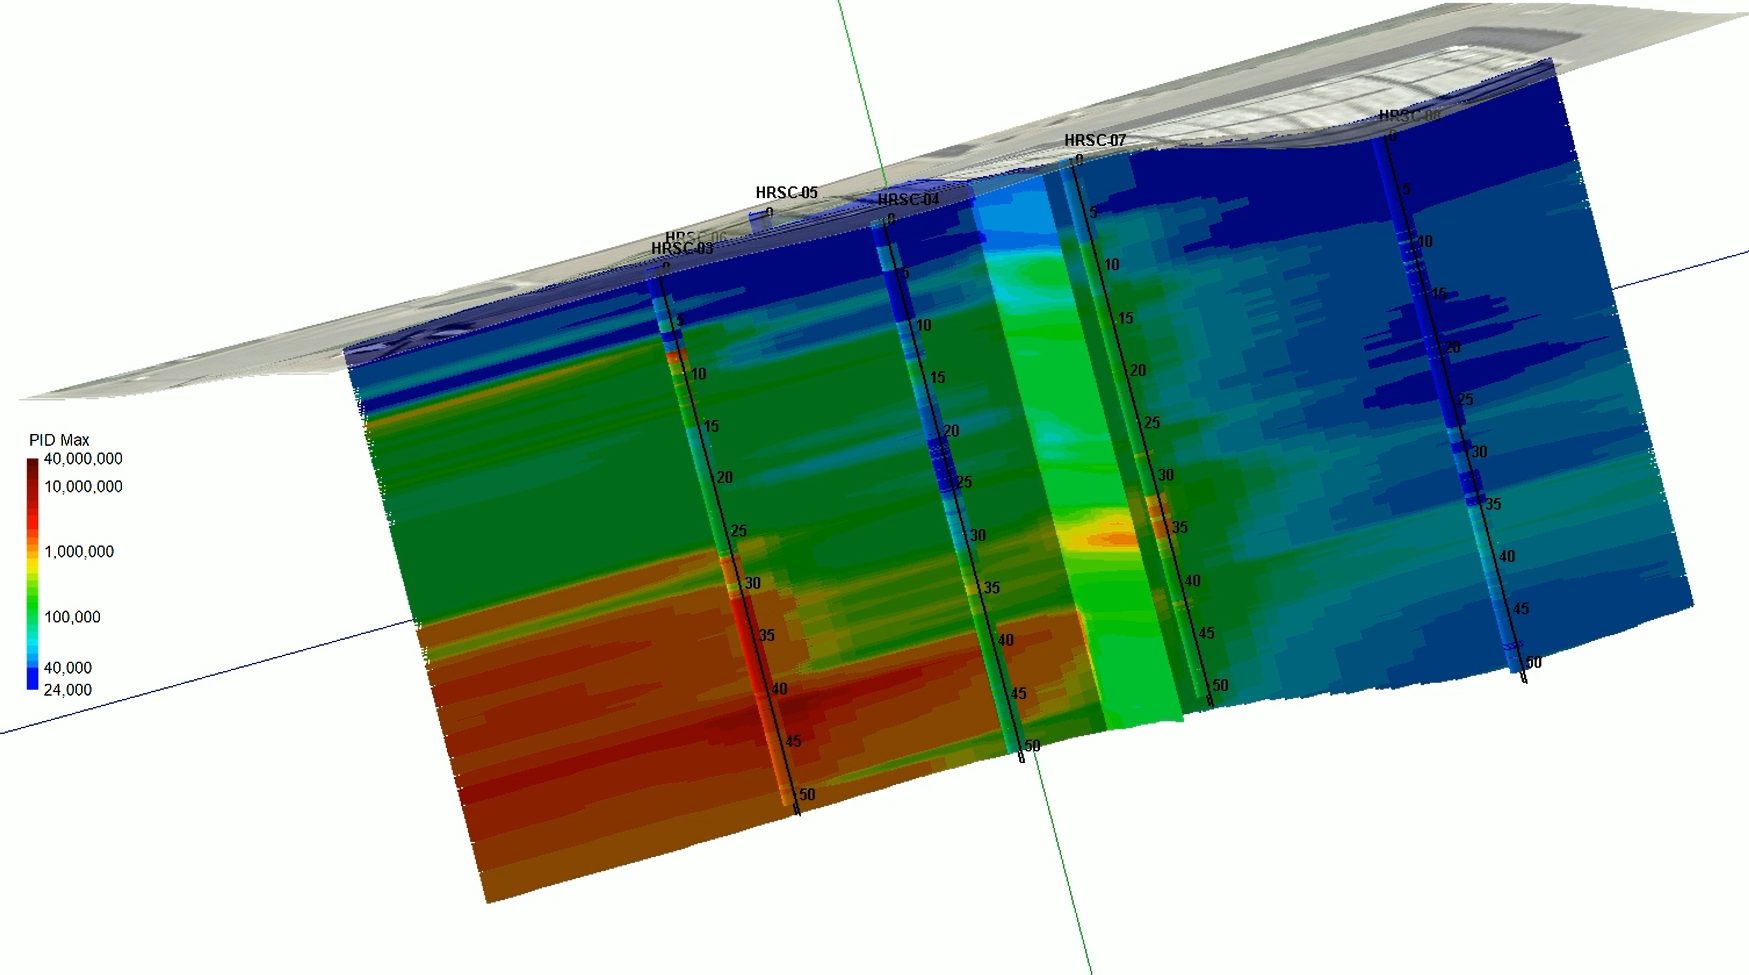 HRSC and Subsurface imaging model of a property, measuring PID using advanced site characterization.